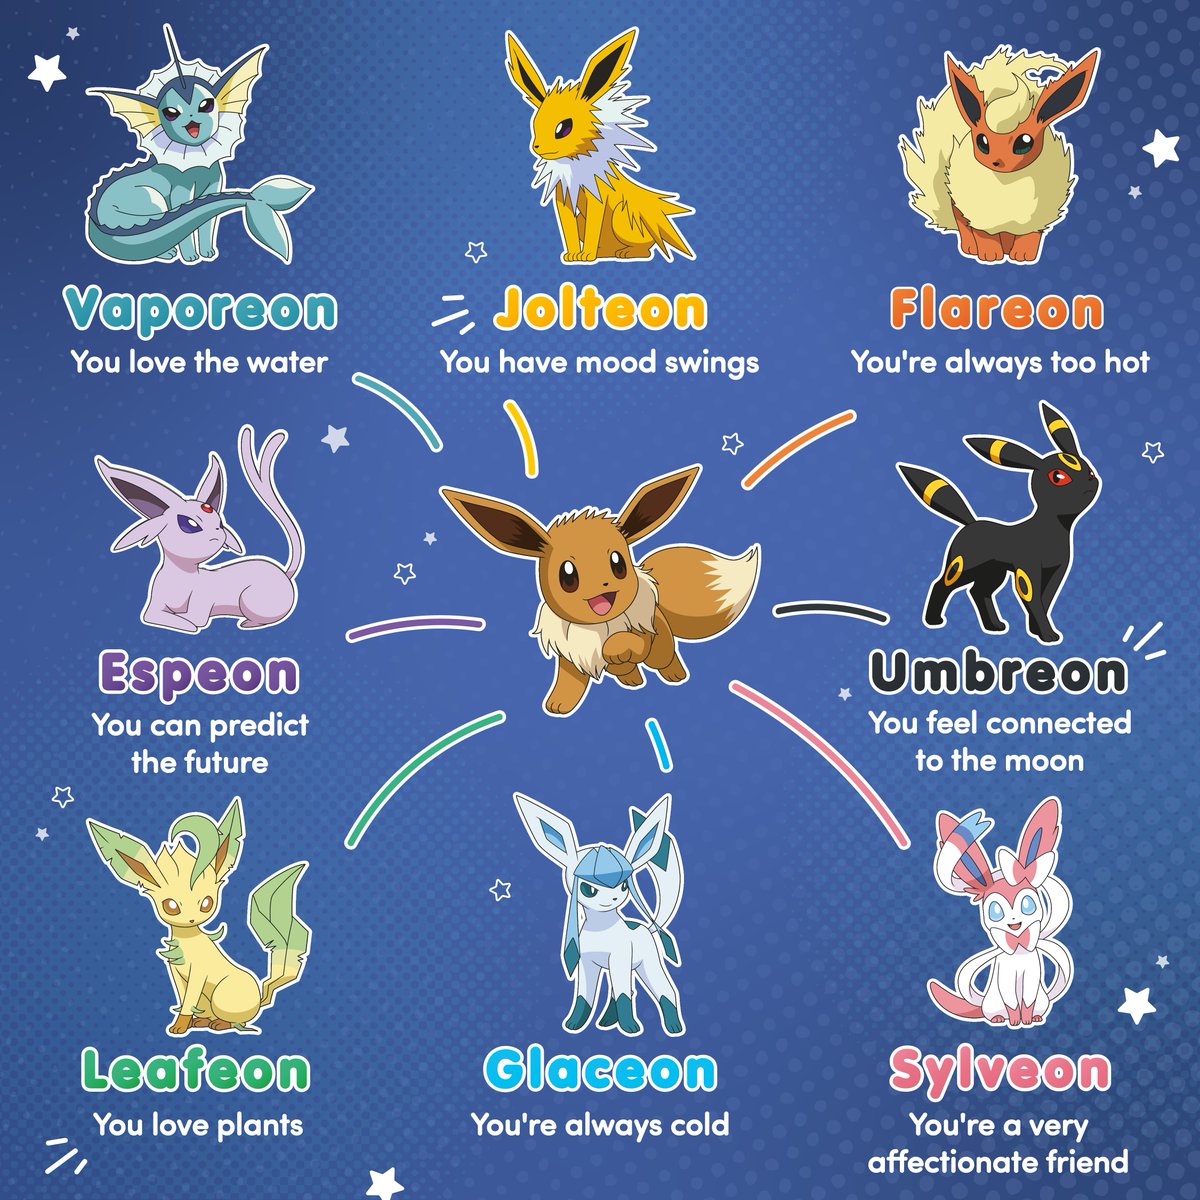 Pokémon UK on X: Find your strongest personality trait to see